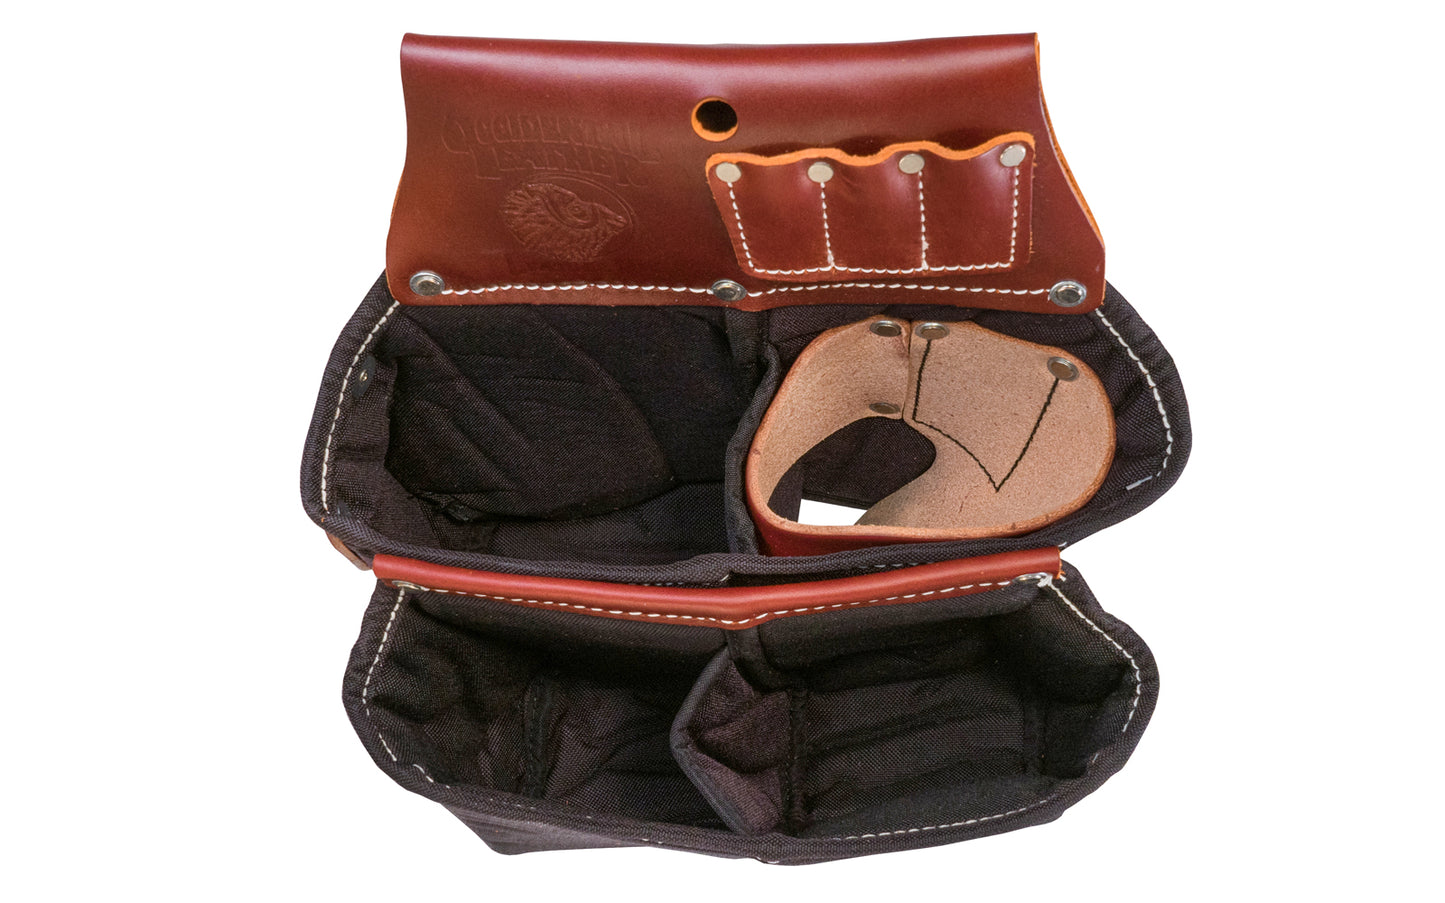 Occidental Leather Impact Screw Gun Drill Bag ~ Model 8068 - This bag by Occidental Leather has two compartments, one is a gun holster plus pouch suitable for tools & quick release clamps used in metal stud work. For the right side, holster is suitable for cordless drills or screw guns. Made of Nylon & genuine Leather